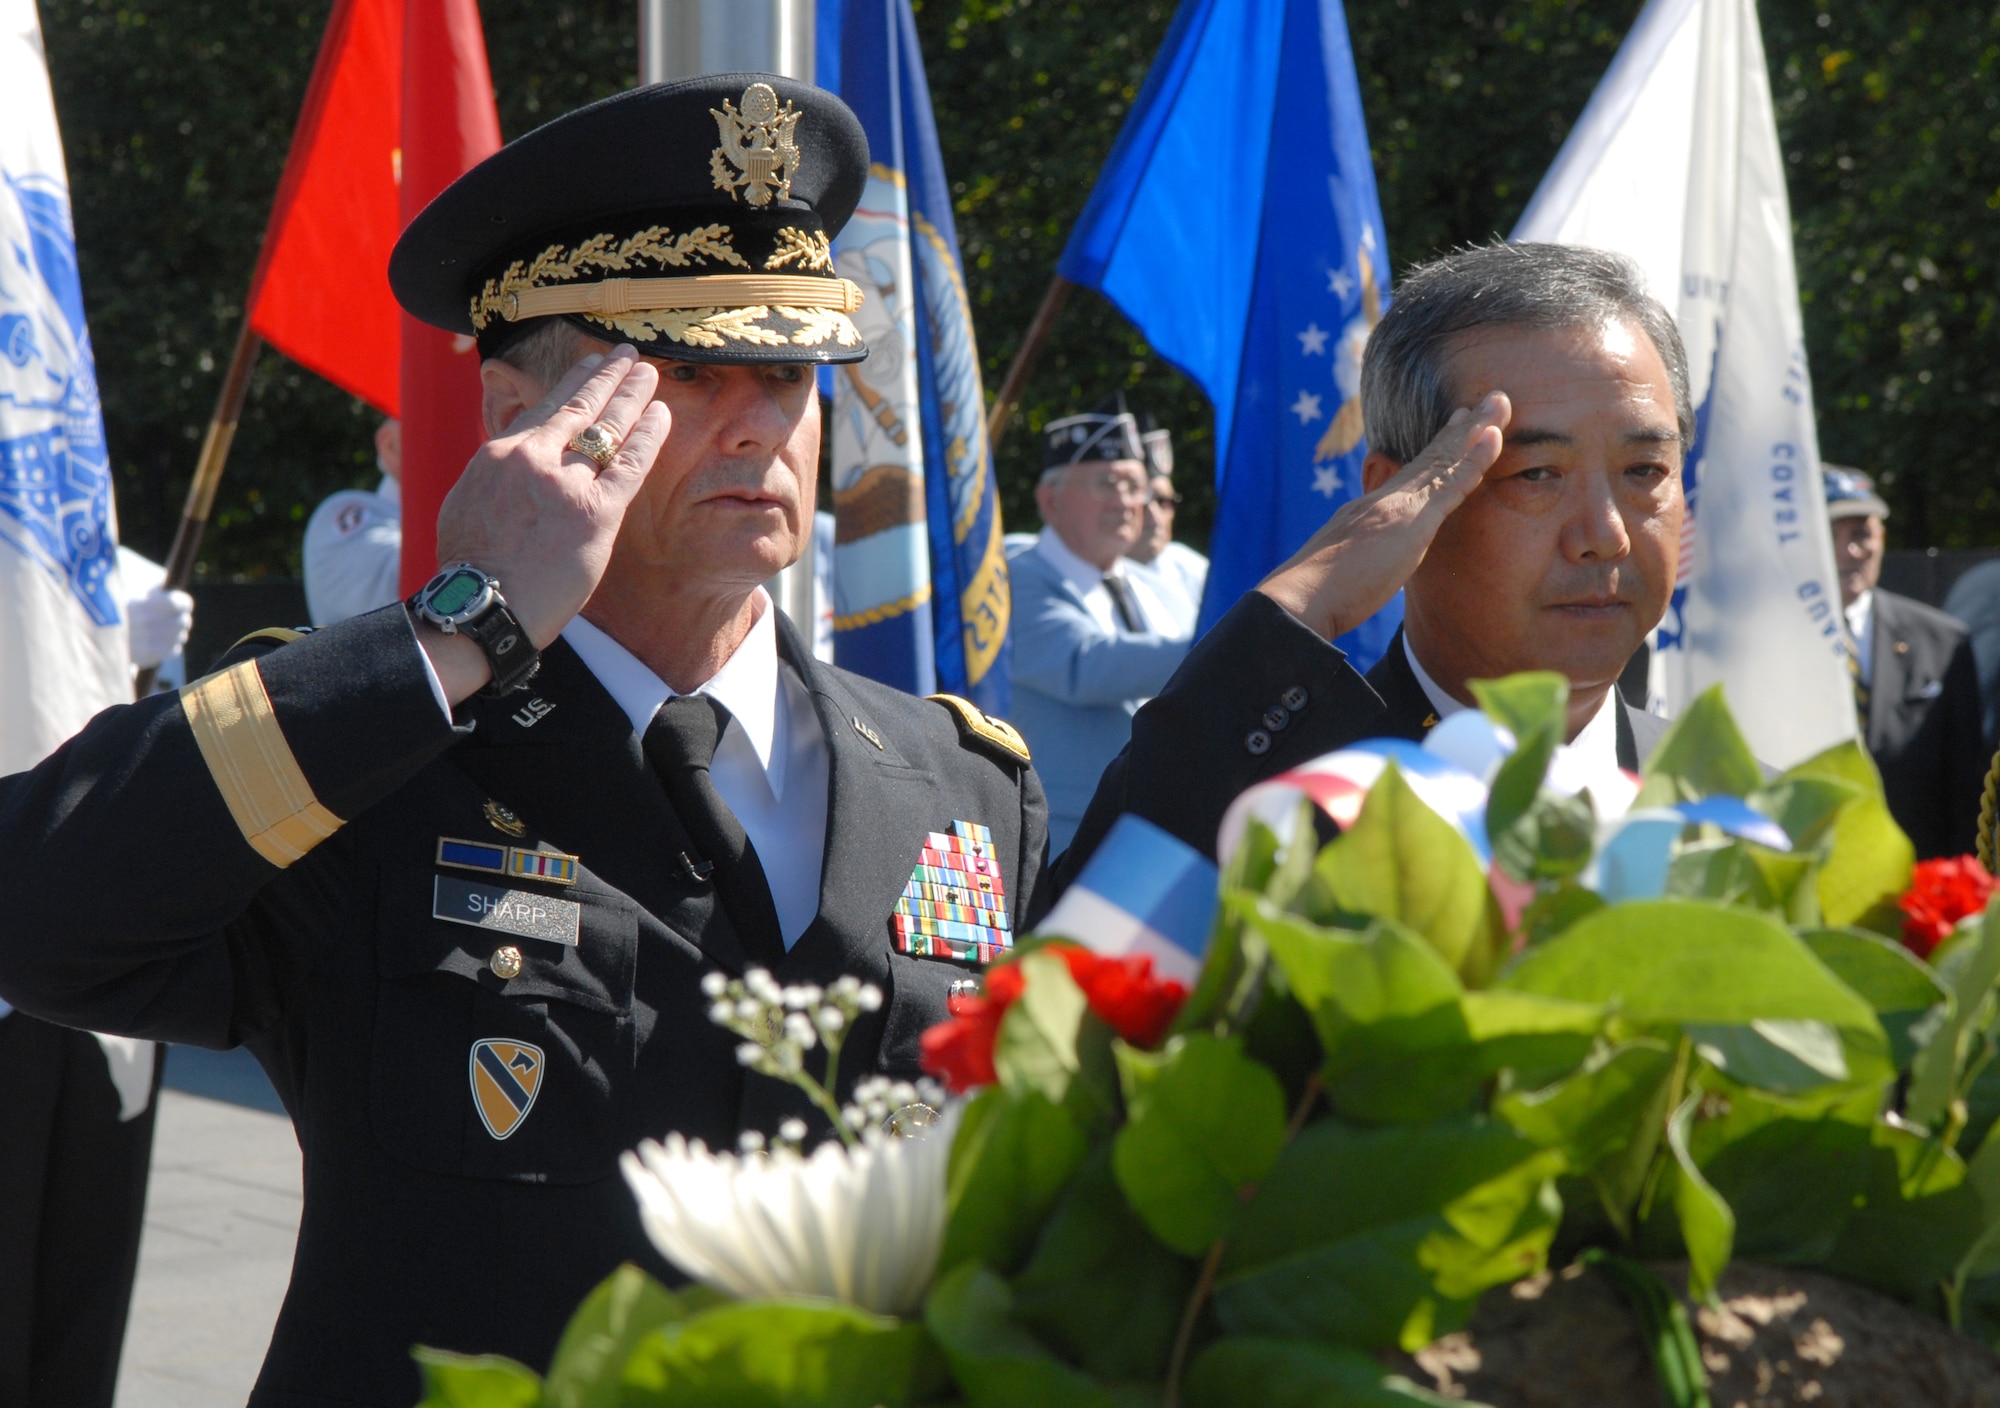 Army Gen. Walter L. Sharp, commander of U.S. Forces Korea, and Jung-ki "Rocky" Park, Korean Corporate Members of the Association of the United States Army, render honors during a wreath-laying ceremony at the Korean War Veterans Memorial in Washington, D.C., Oct. 5, 2009. (Defense Department photo/Sgt. 1st Class Michael J. Carden)  